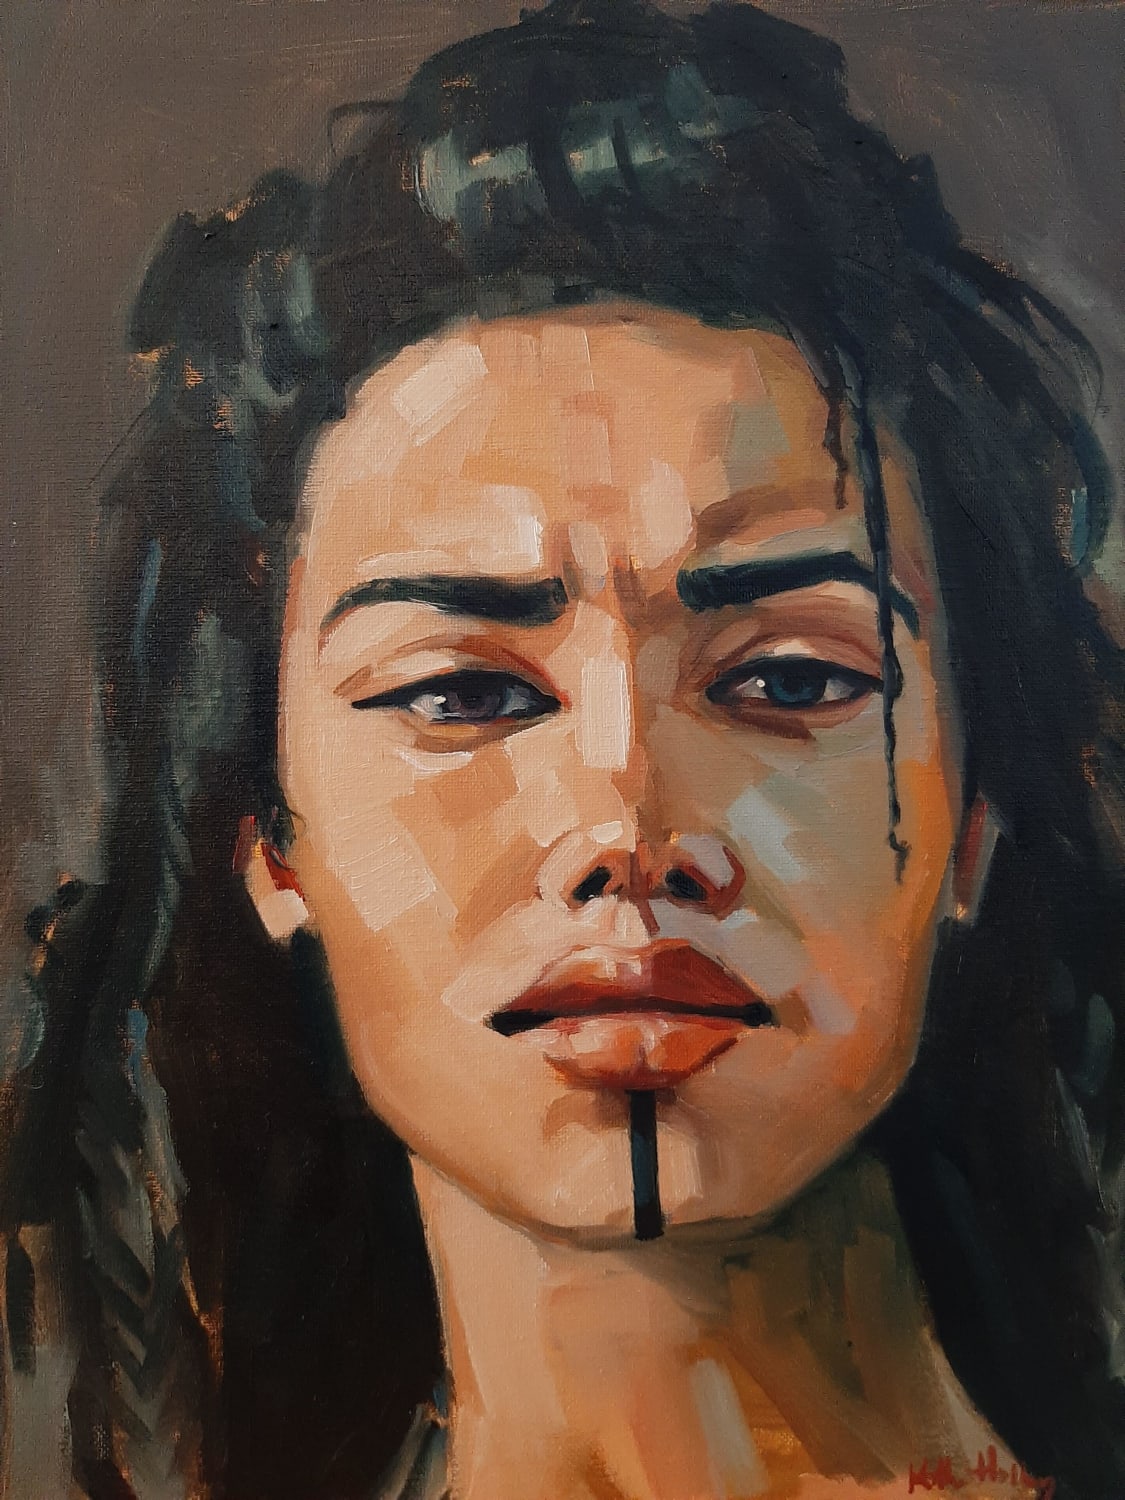 Oil painting portrait of Yasha, pushing out of my comfort zone.